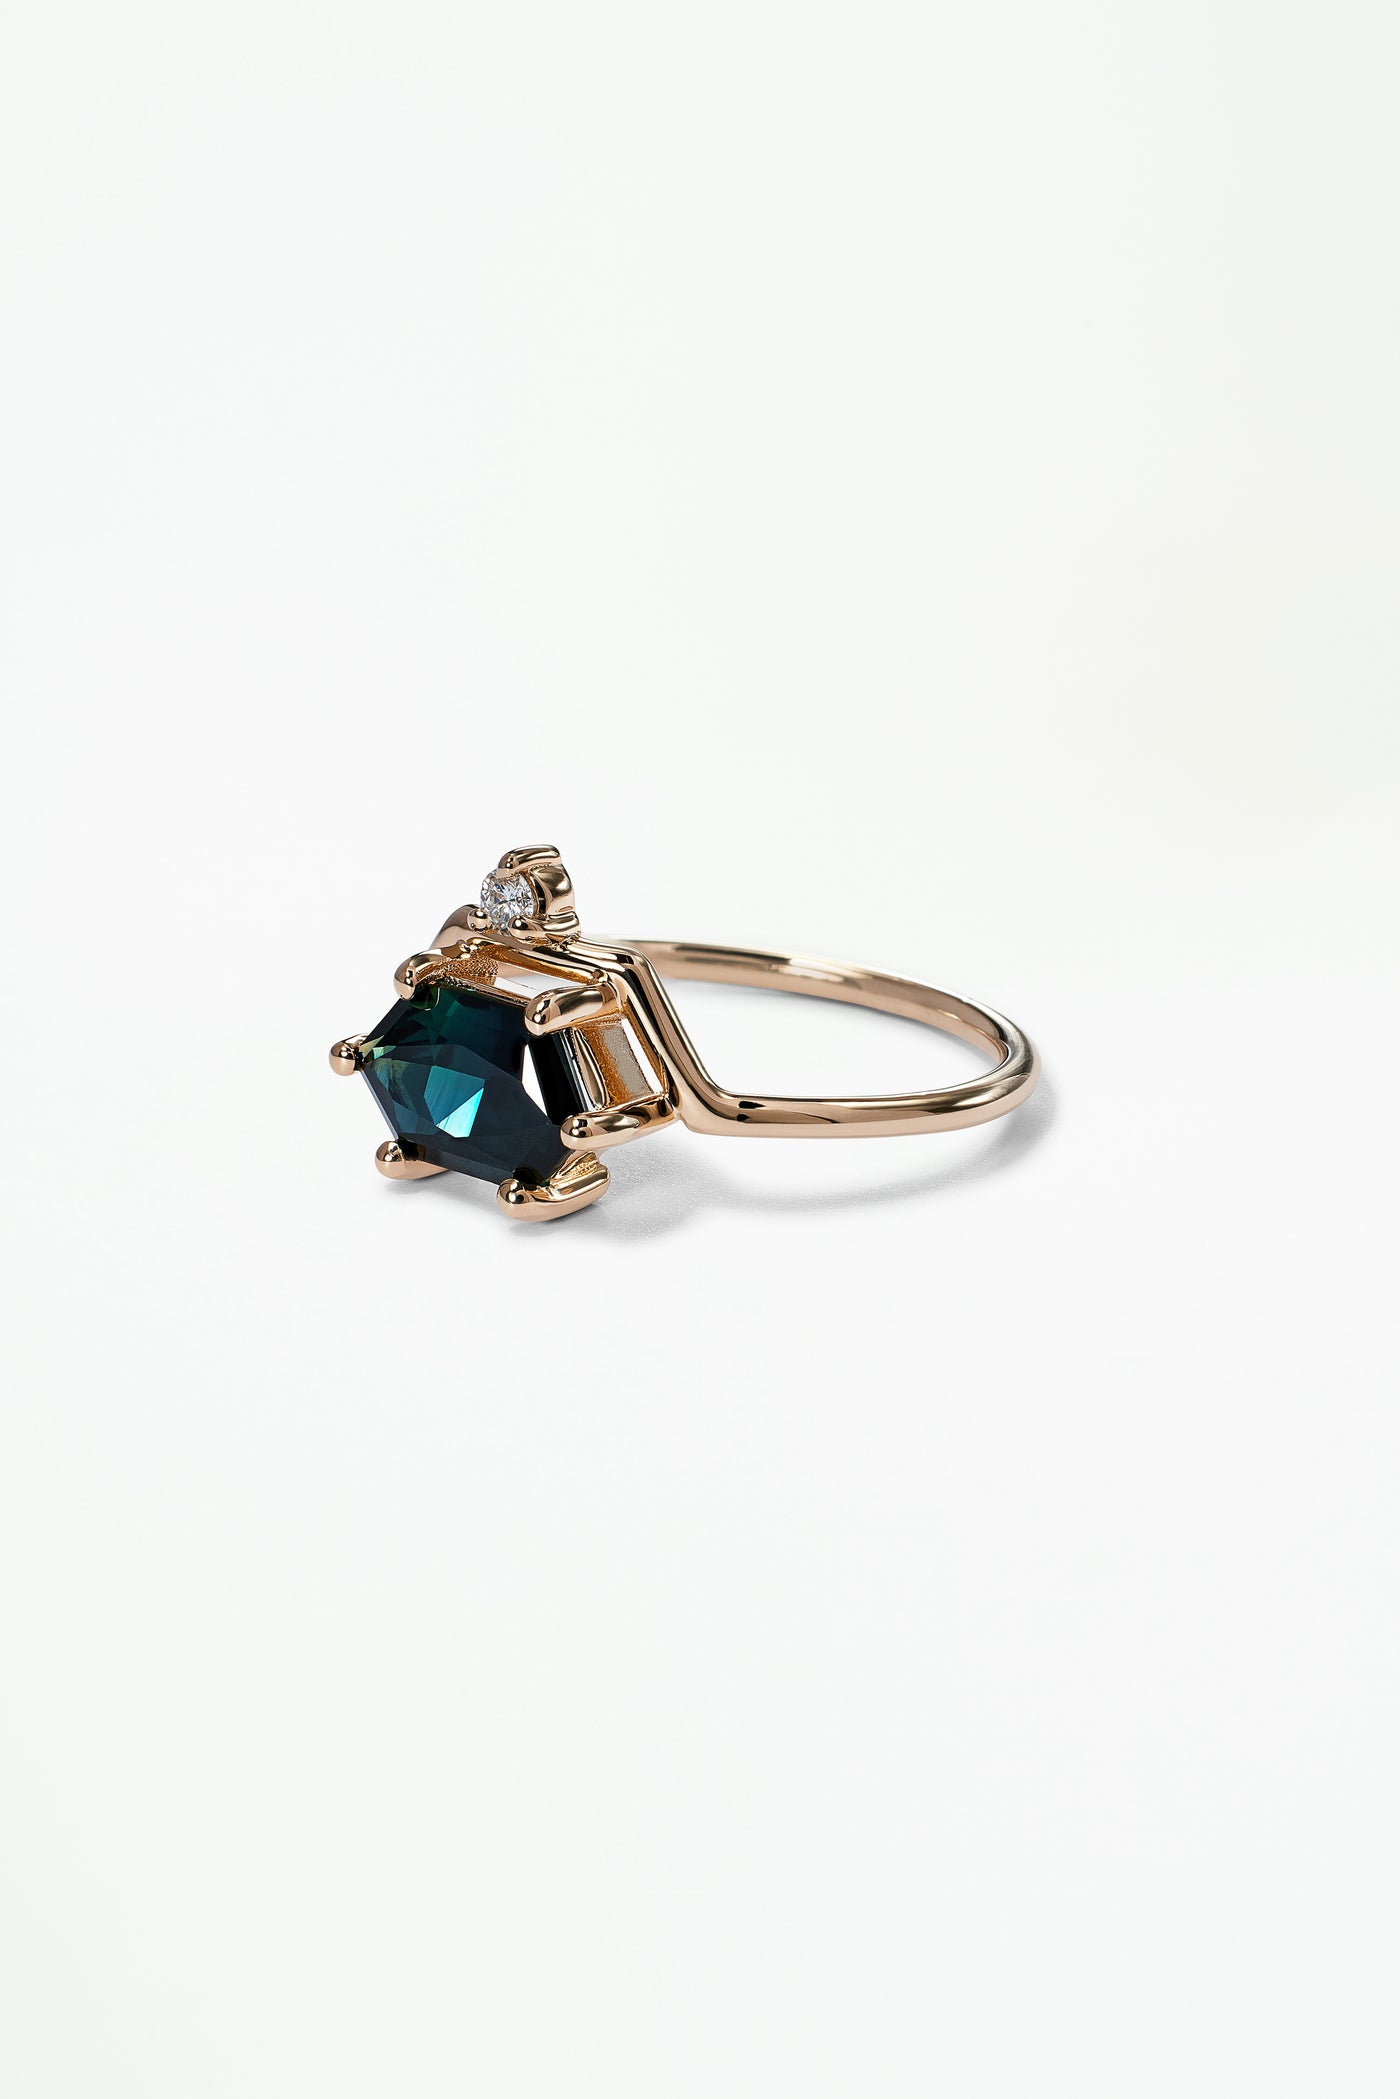 One of a Kind Hexagon Cut Sapphire and Diamond Nestled Ring No. 2